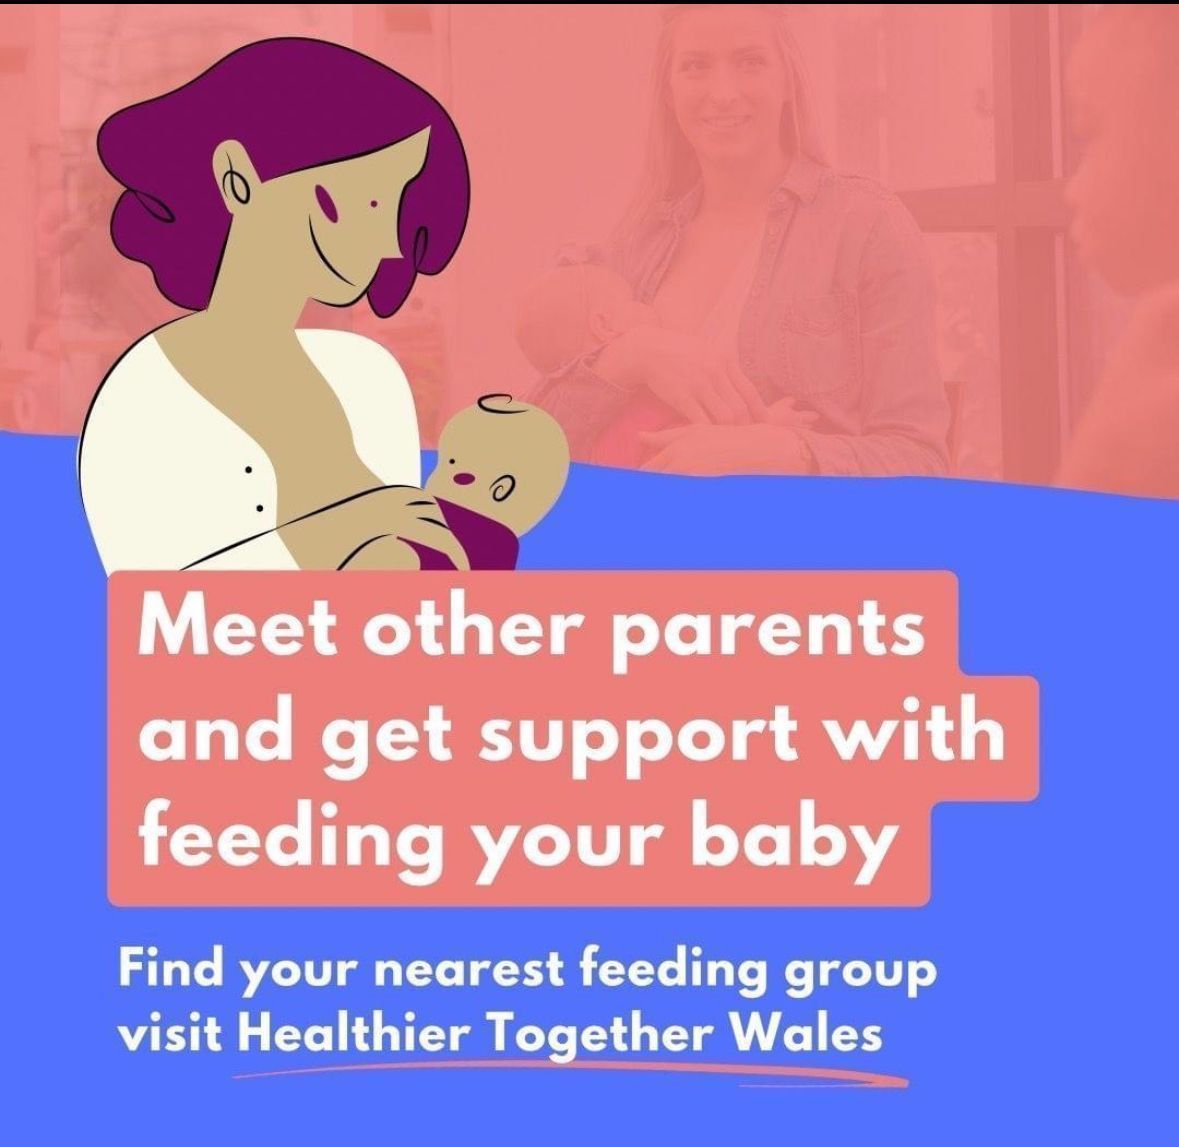 If you want to meet other parents and get some advice on feeding your baby, Aneurin Bevan University Health Board has hosted details of all the current feeding groups that parents can access throughout. For more info visit: buff.ly/3tJgQez